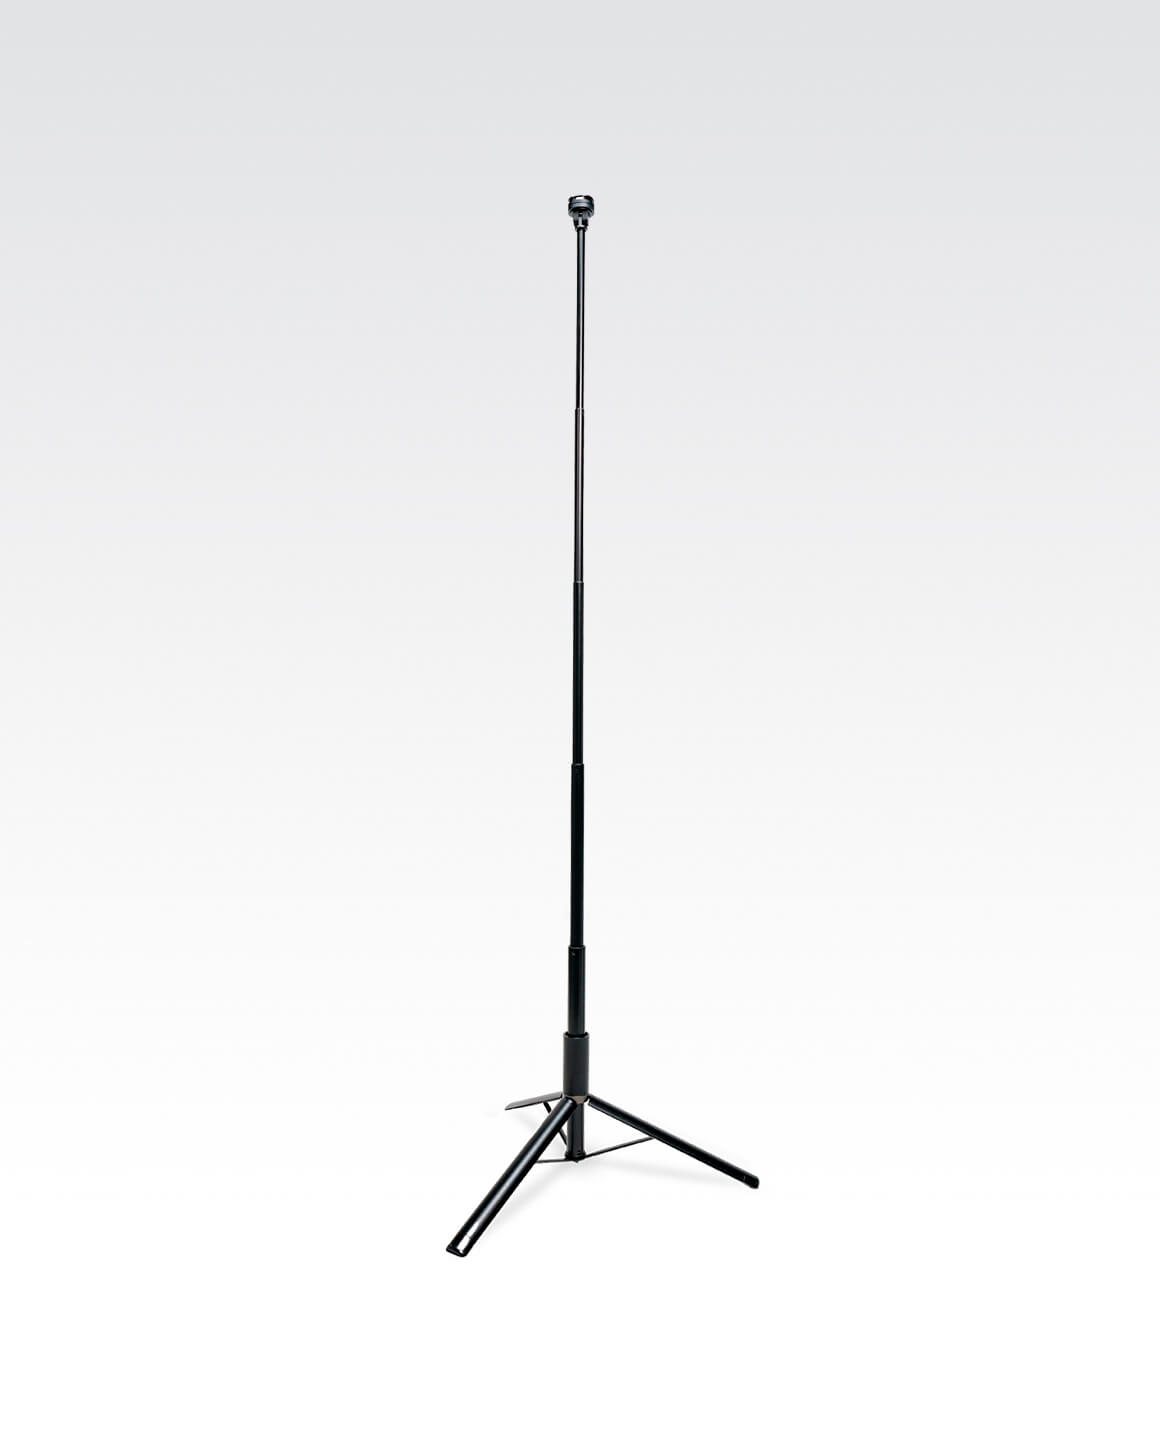 Lume Cube black metal collapsible and portable 5-Foot Adjustable Light Stand fully-extended to 60"